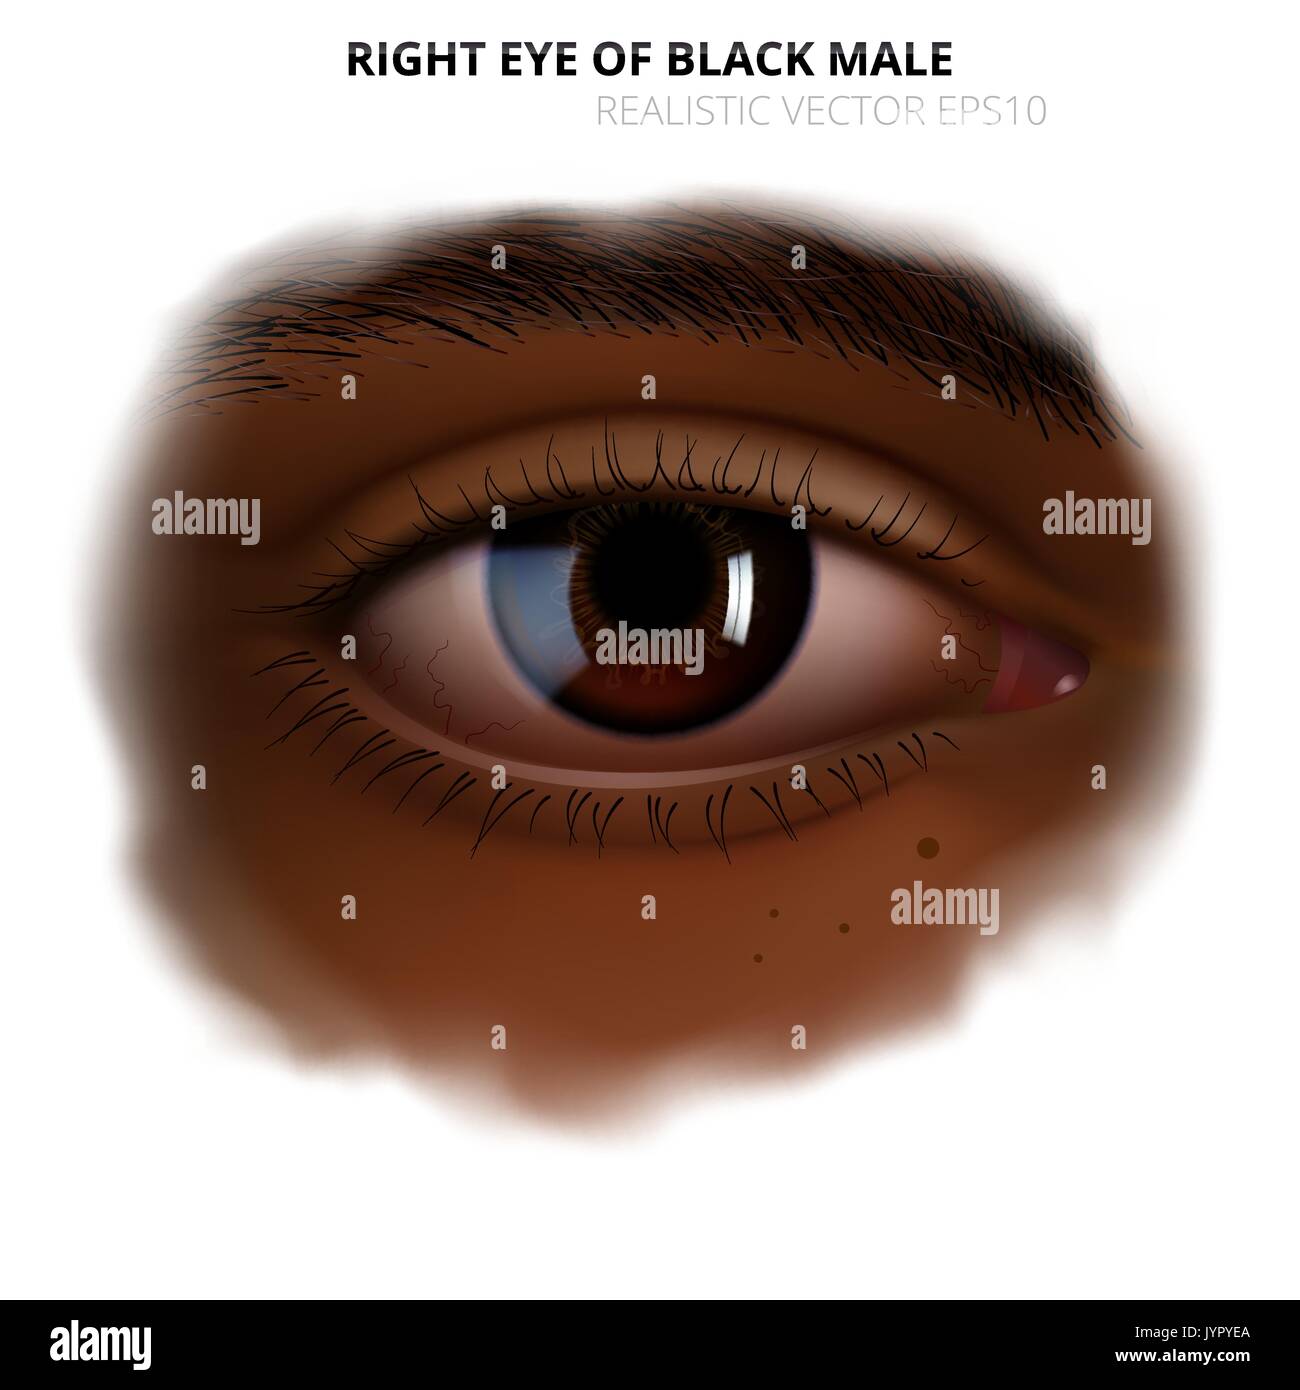 Realistic human eye. Detailed right eye of adult black woman or man with a glossy brown iris. Dark skin of face with a blurred transparent edge. Stock Vector